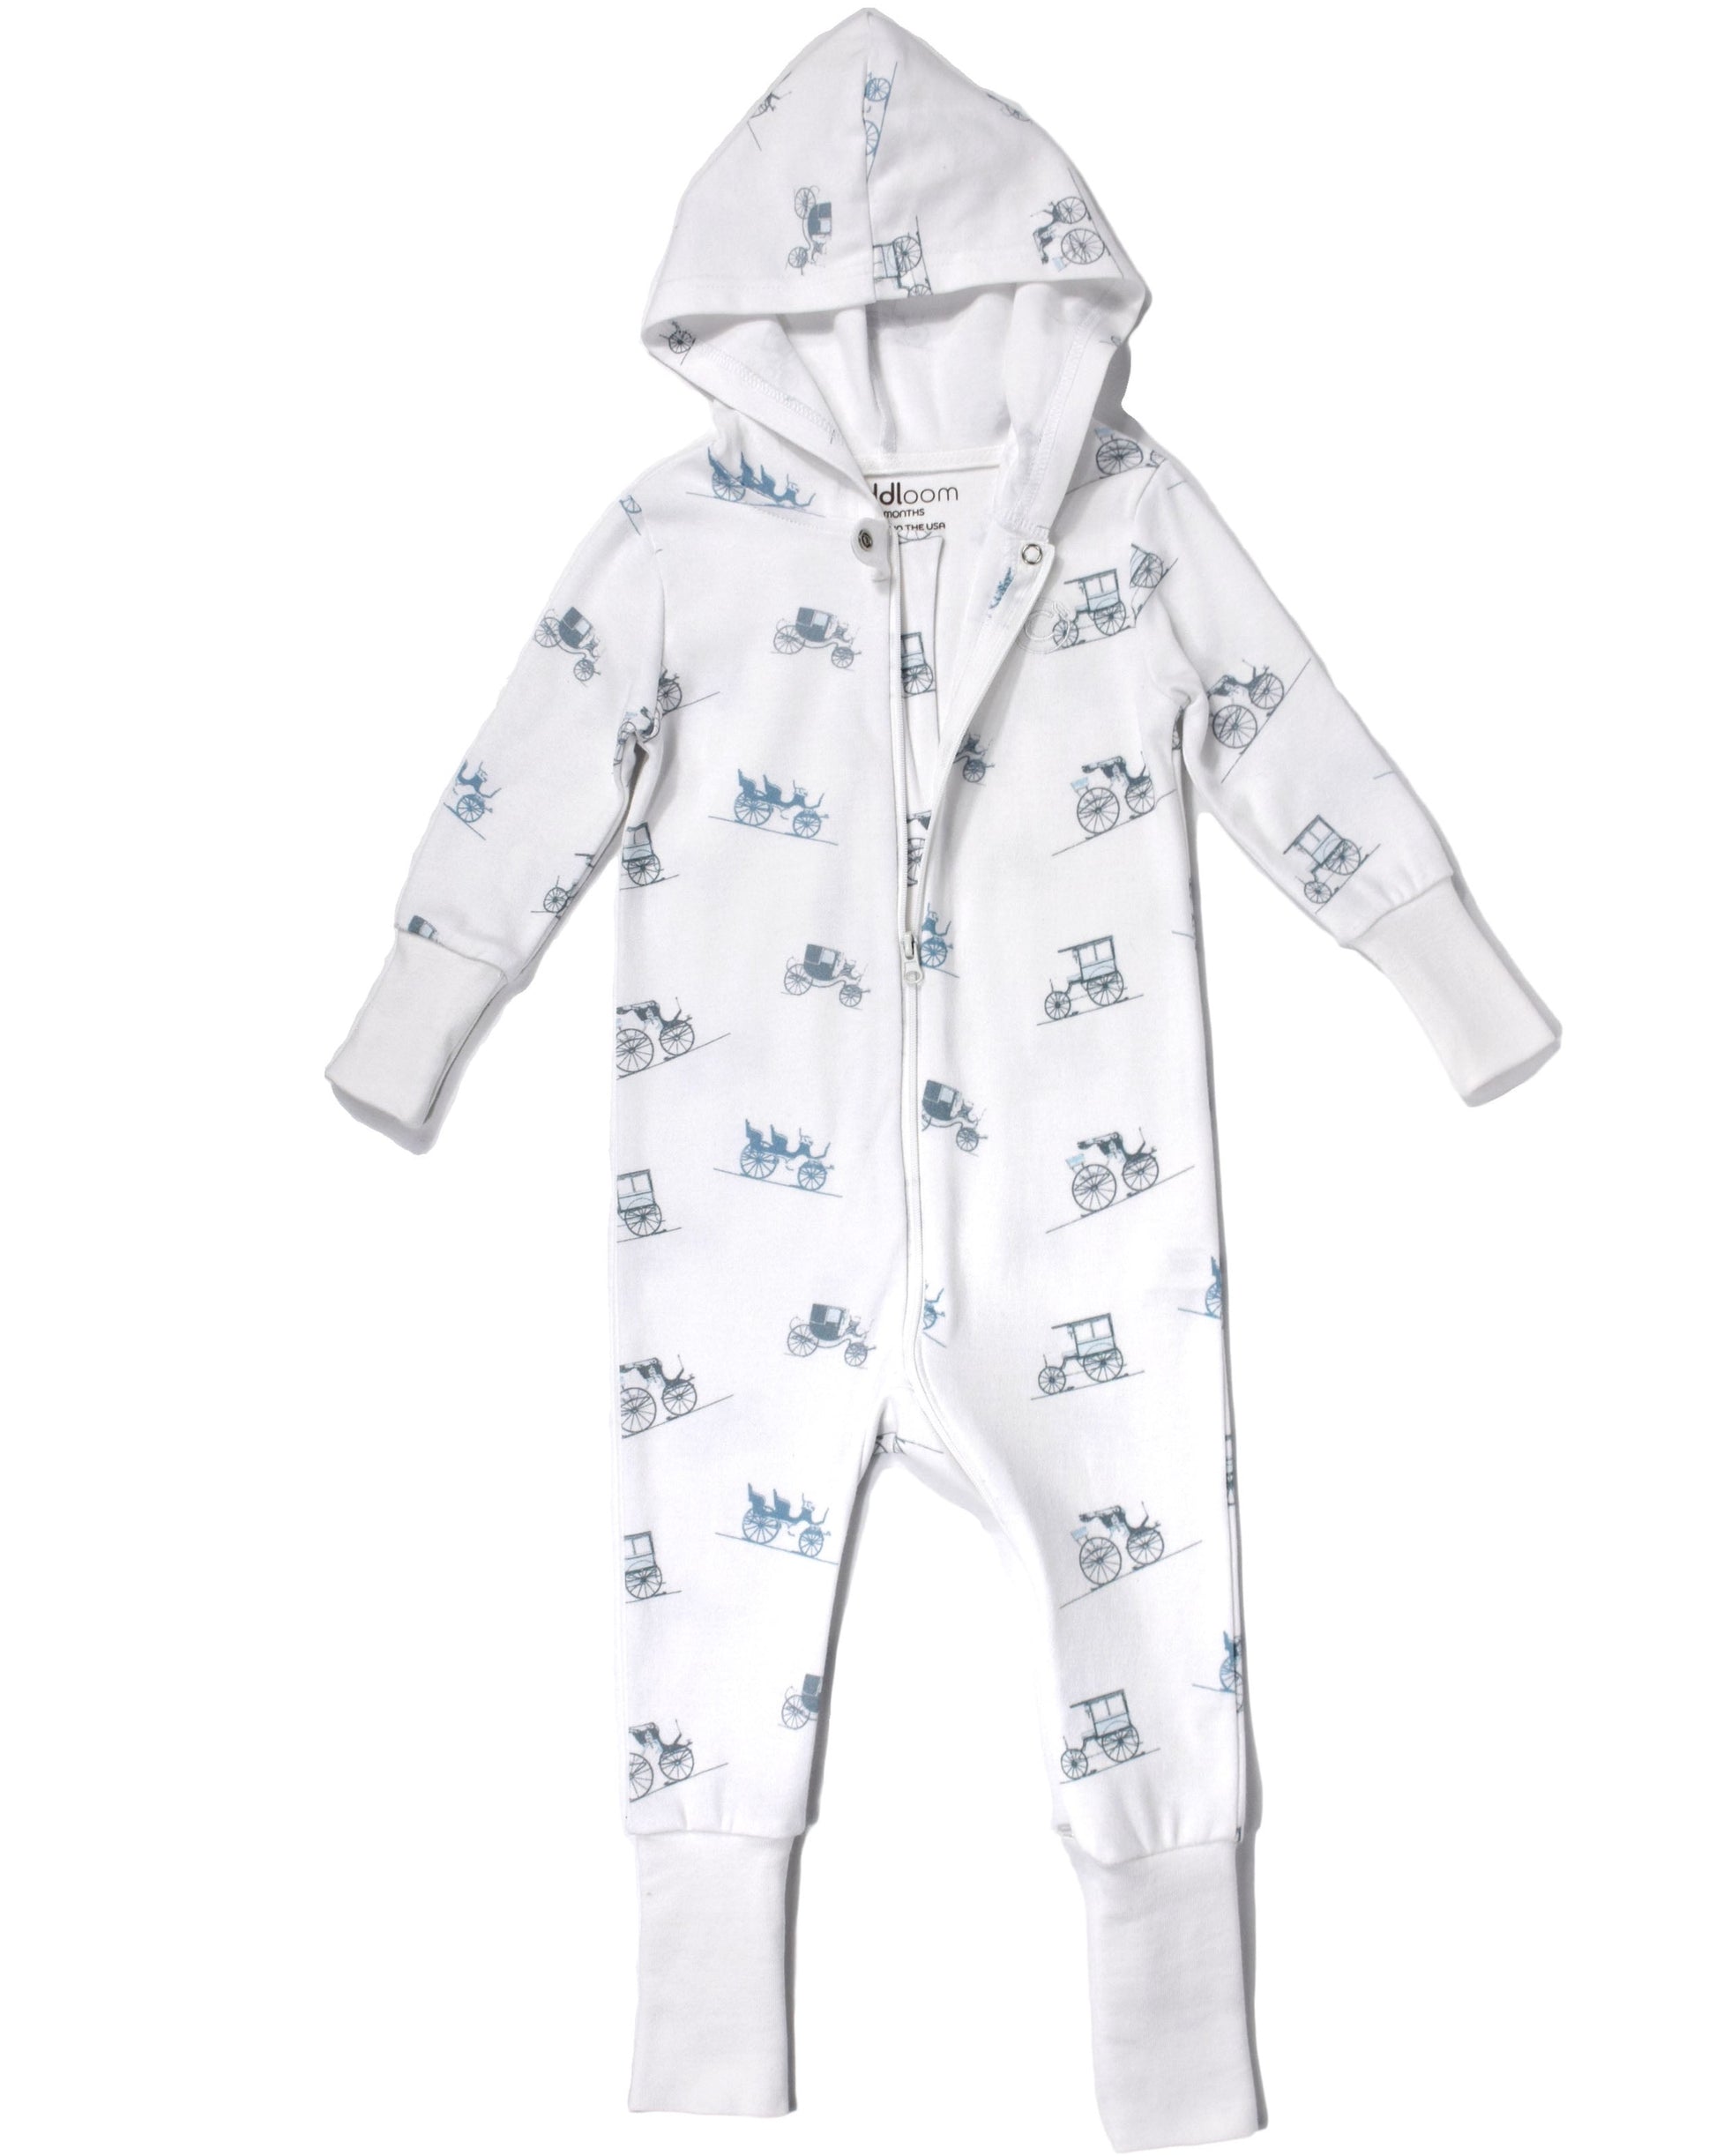 Shop Grow-on Romper with Hood